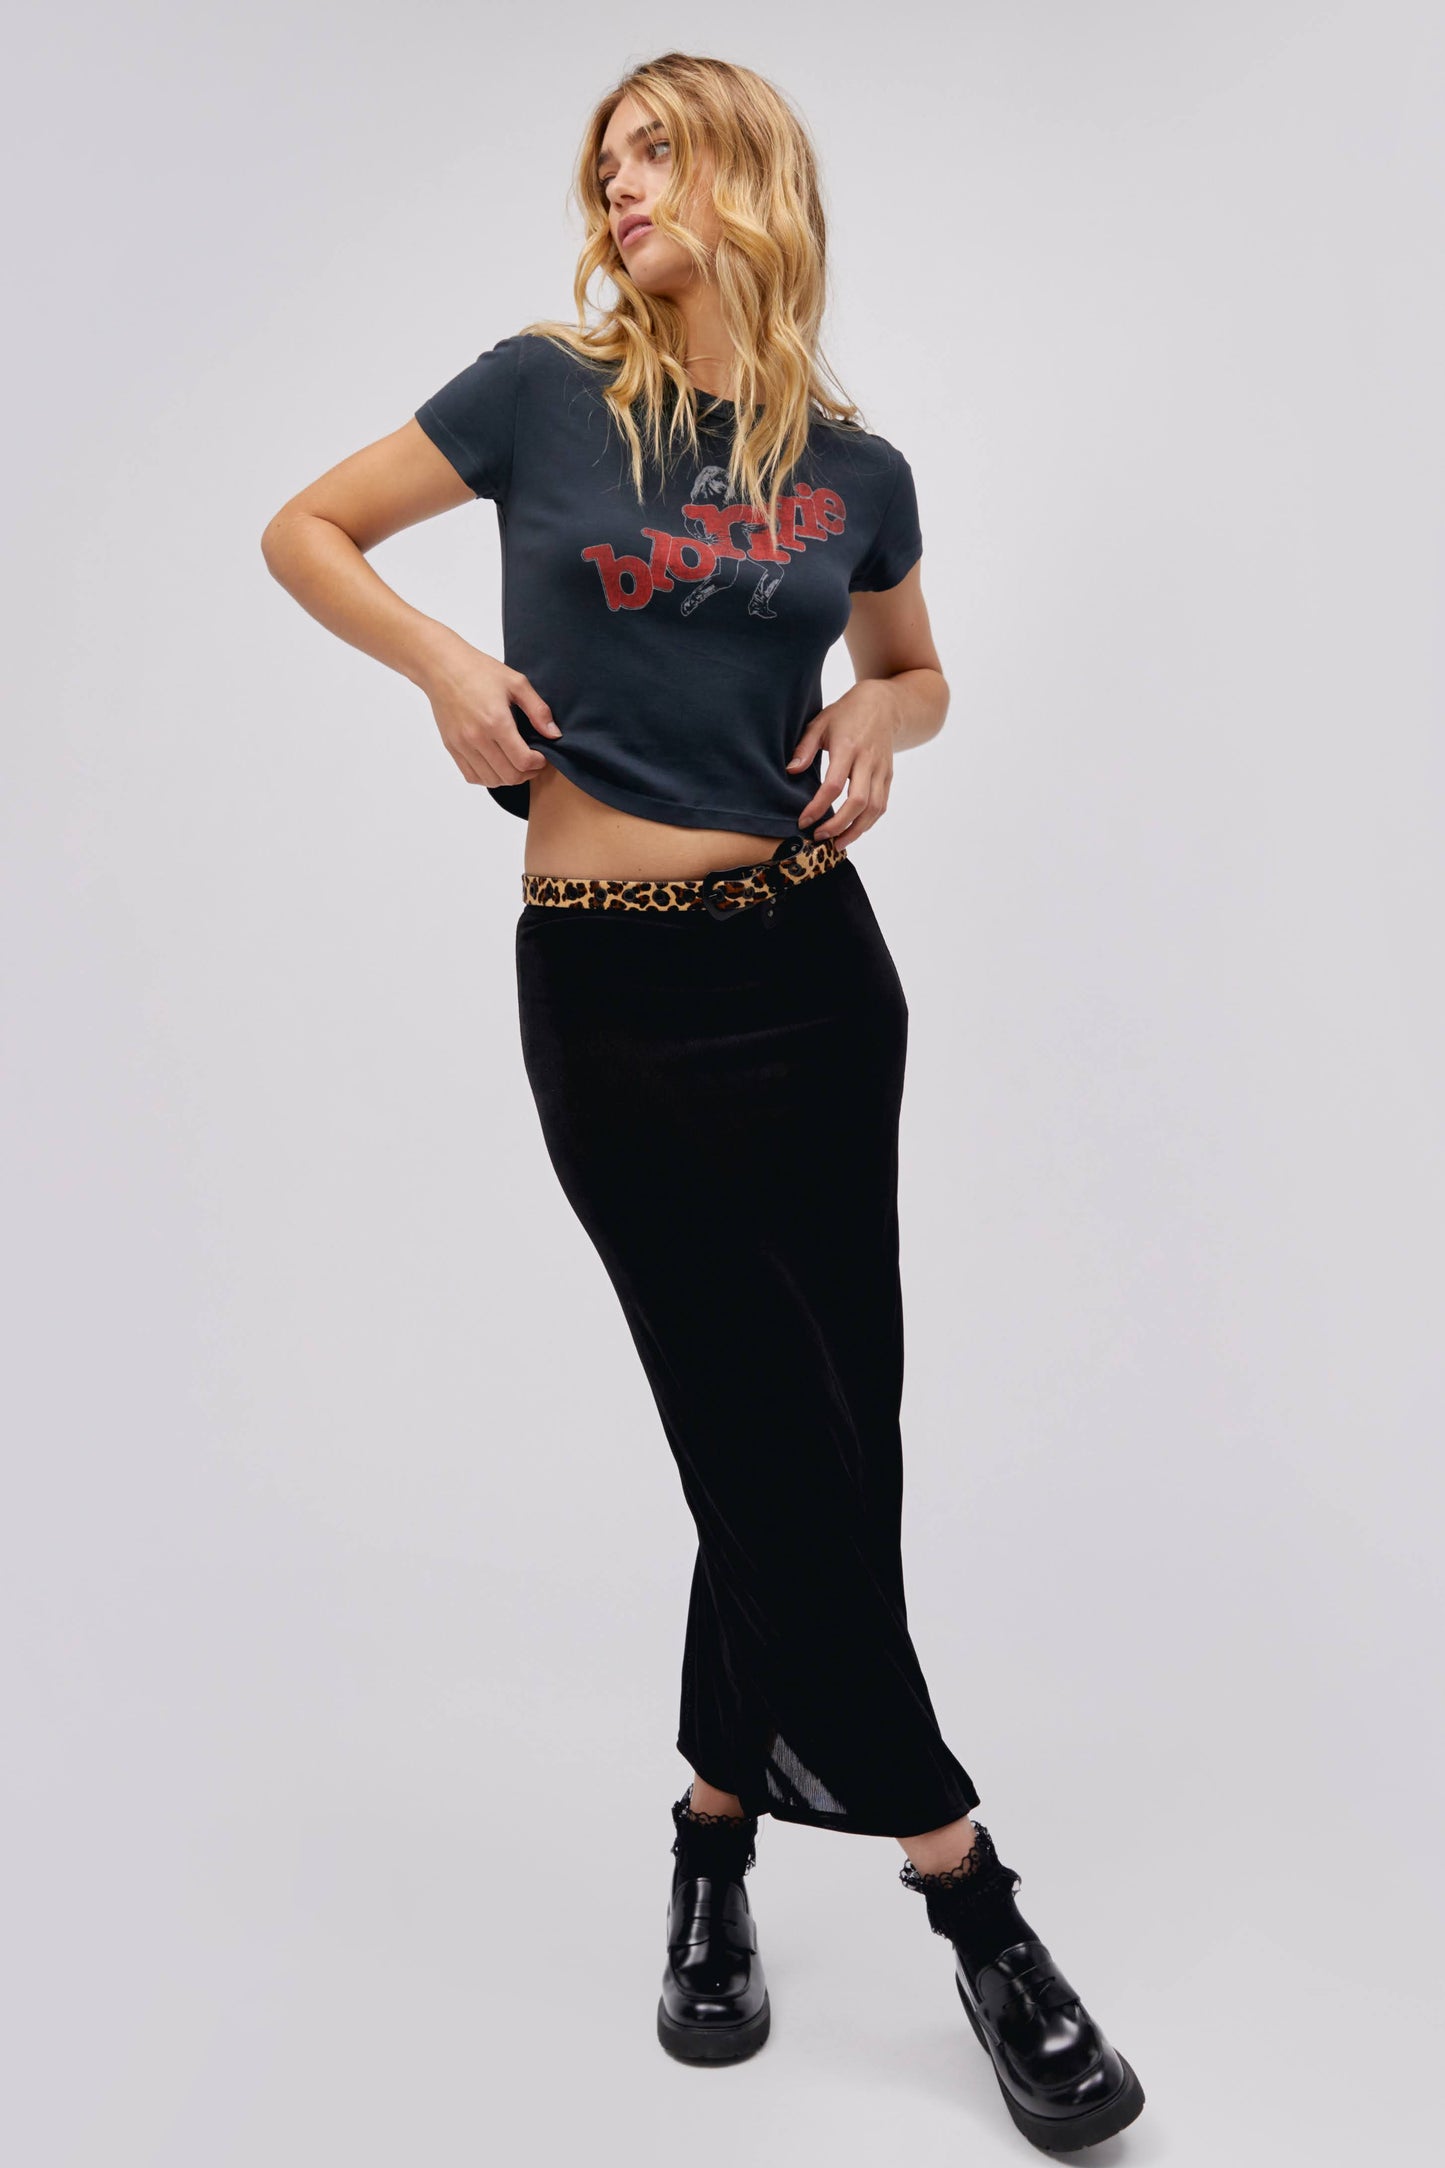 A blonde-haired model featuring a black tee stamped with 'blondie' in red, scattered letters.